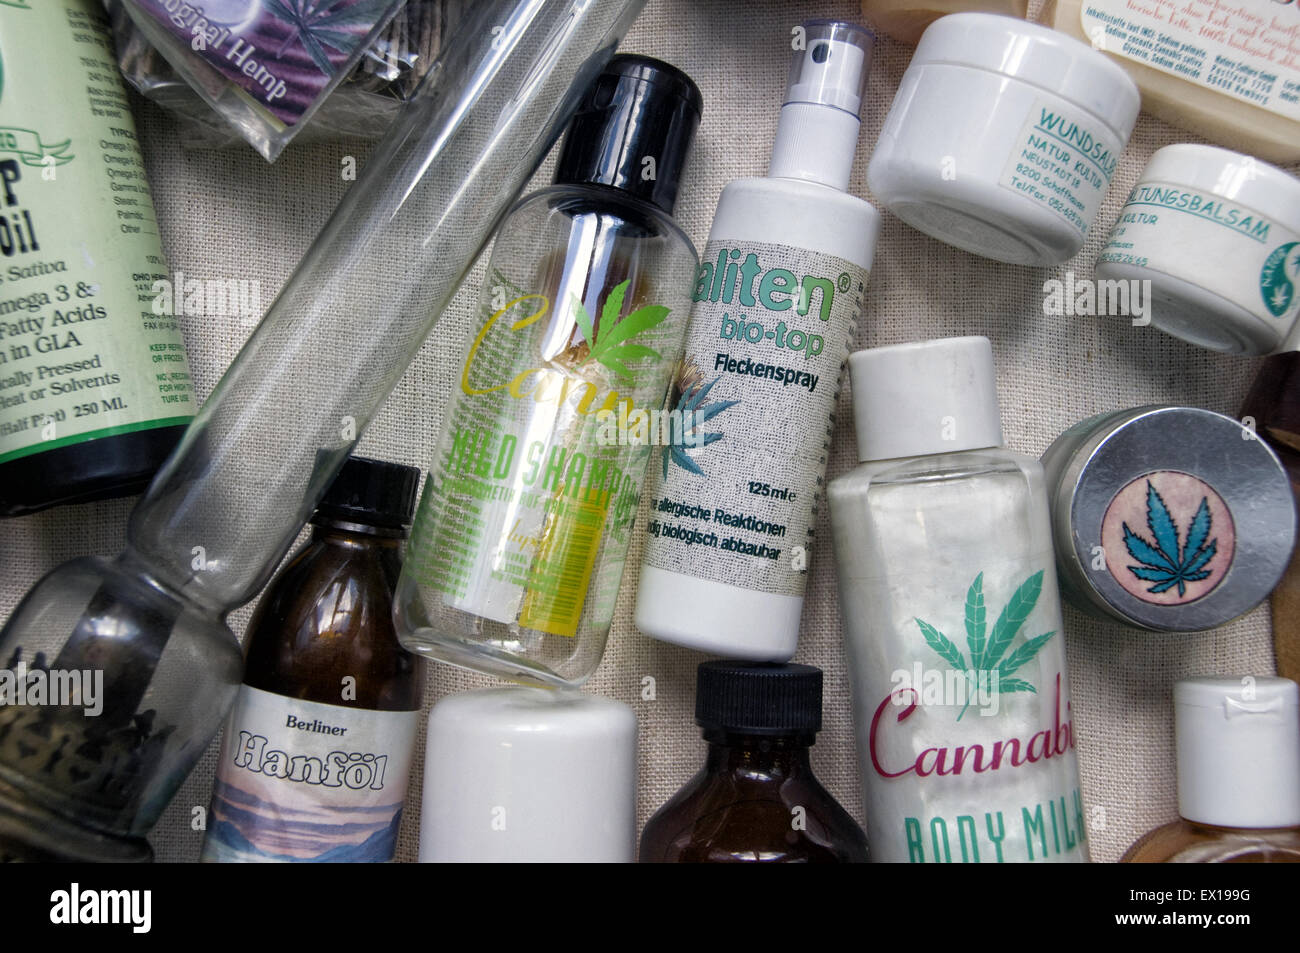 Cannabis pharmaceutical products displayed at Hanf Museum which provides a comprehensive view of the wide range of possibilities of the cultural plant Cannabis, Berlin Germany Stock Photo